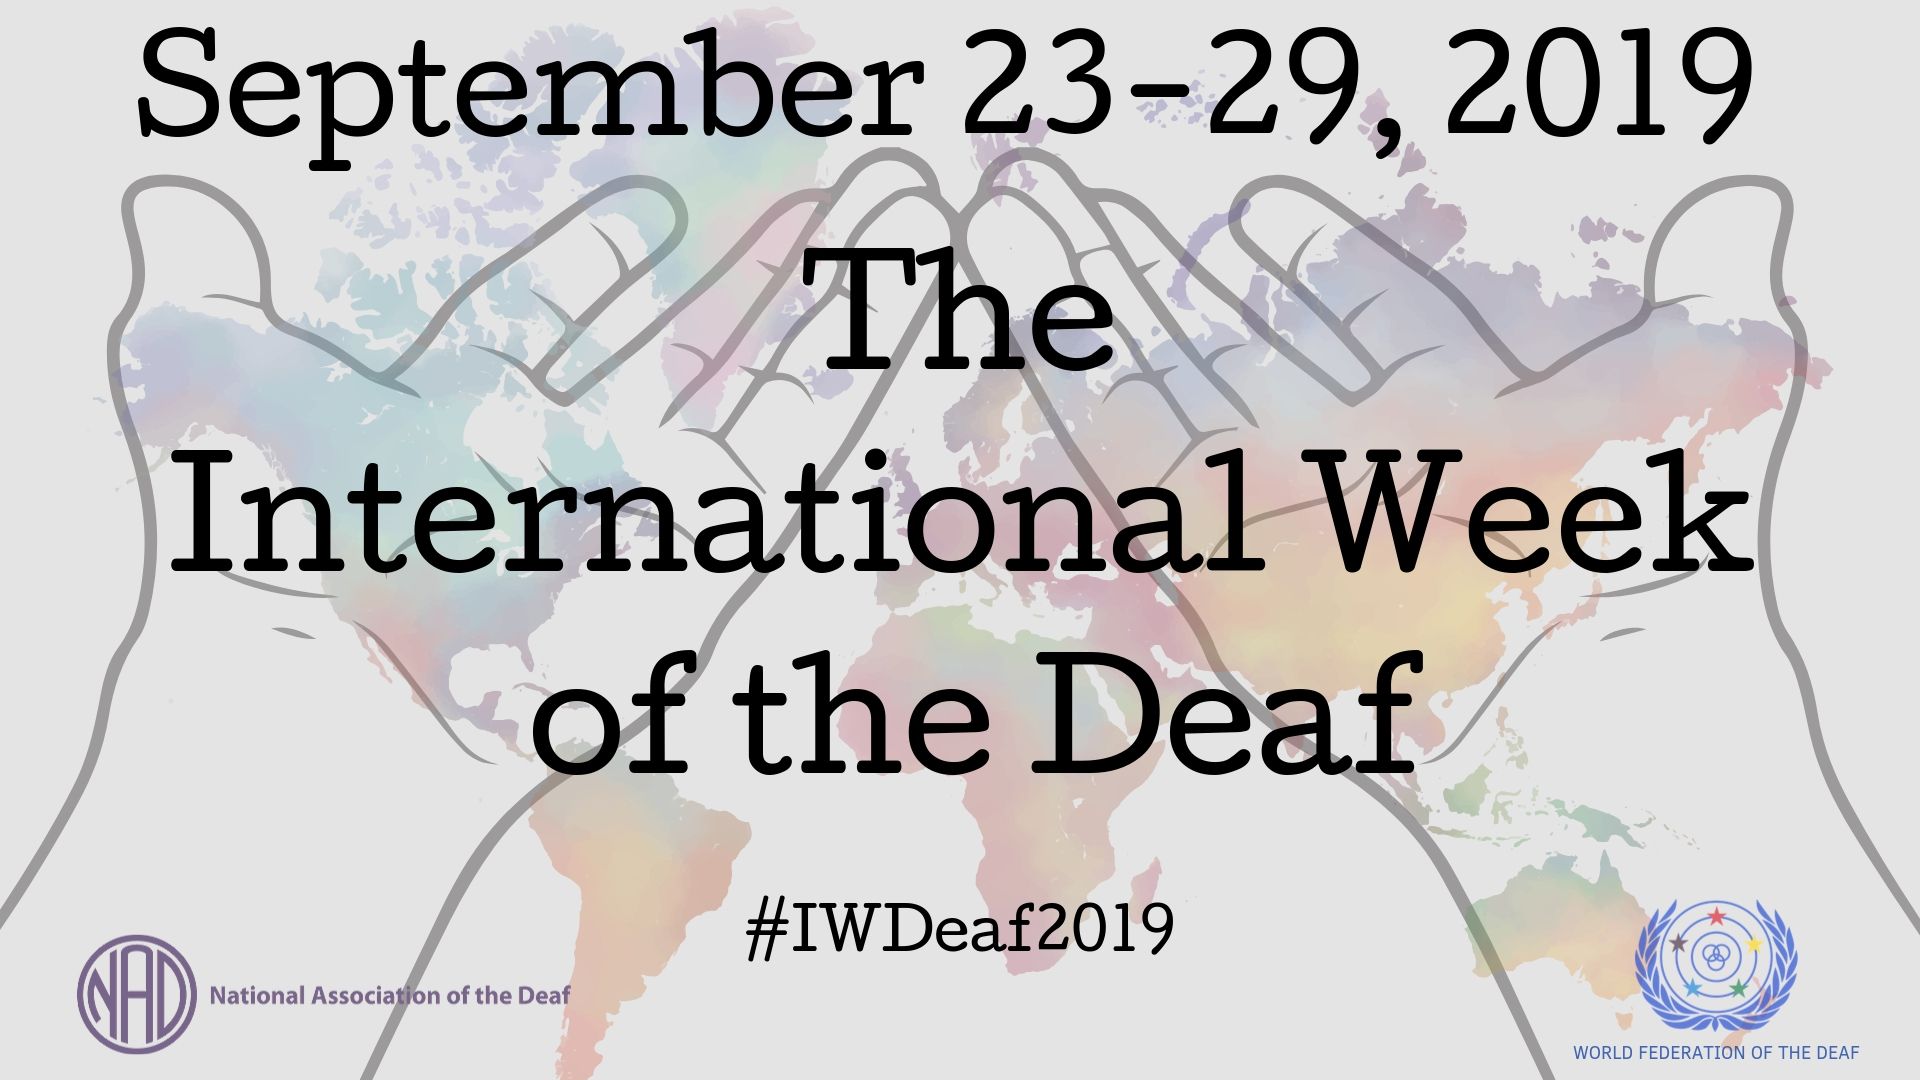 September 23-29 2019 The interantaional week of the deaf #IWD2019